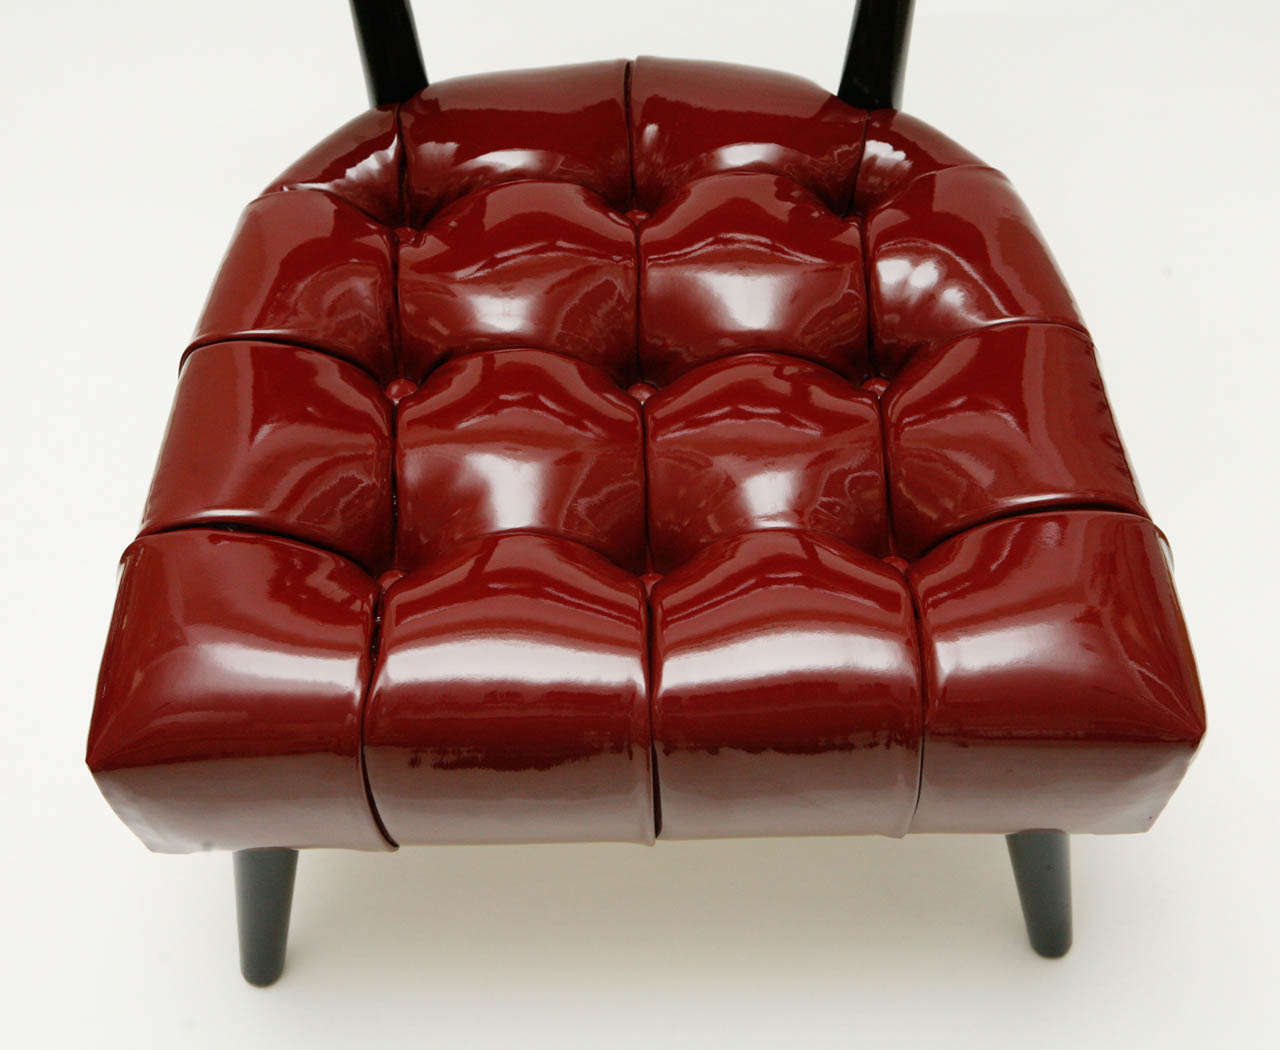 American Pair of Biscuit-Tufted Hostess Chairs by William Haines